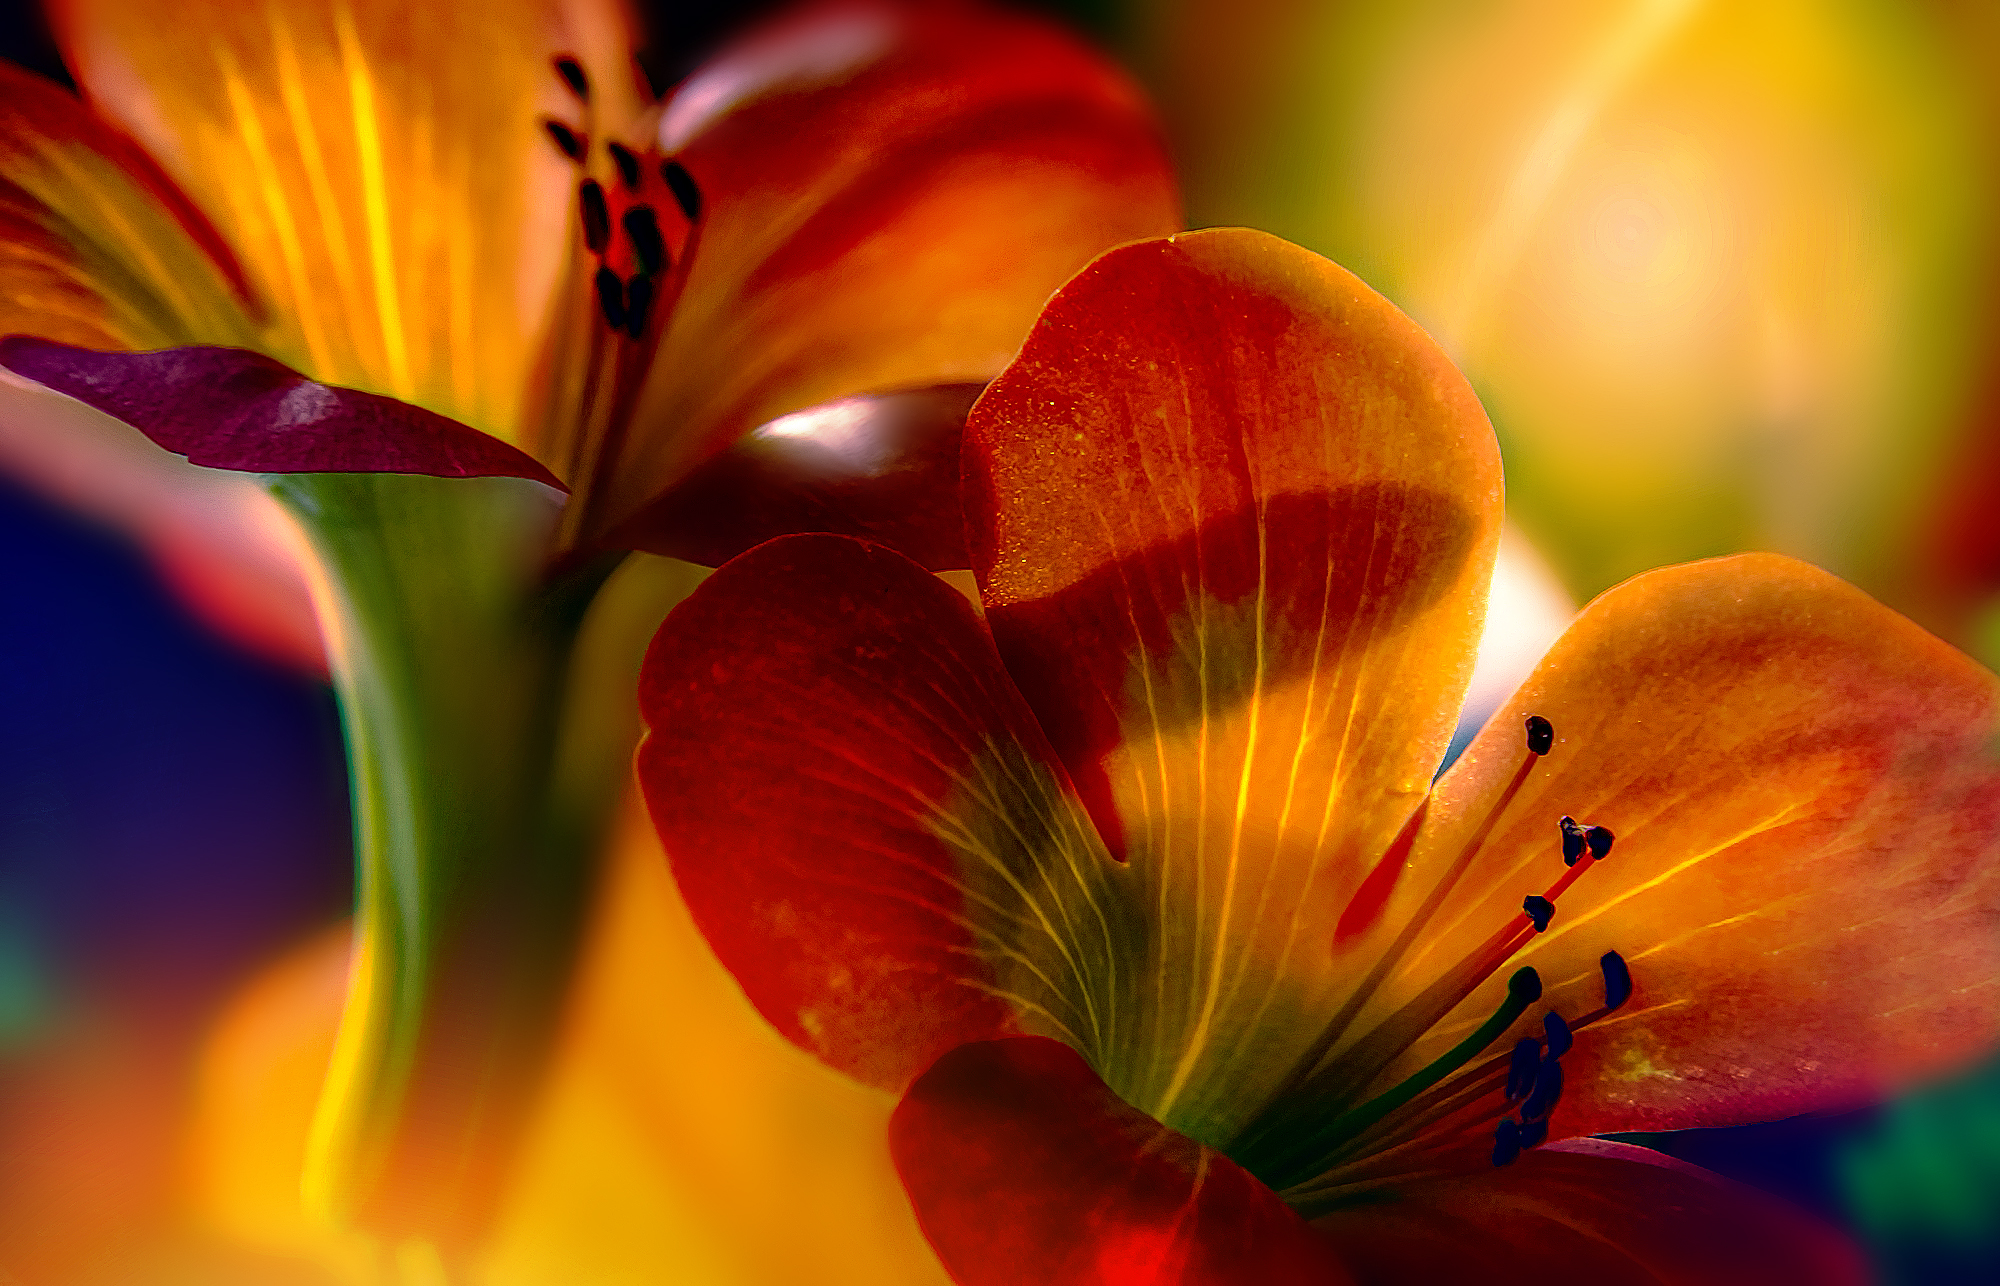 airootfs/usr/share/backgrounds/ray_bilcliff/Flowers_(image_by_Ray_Bilcliff).jpg